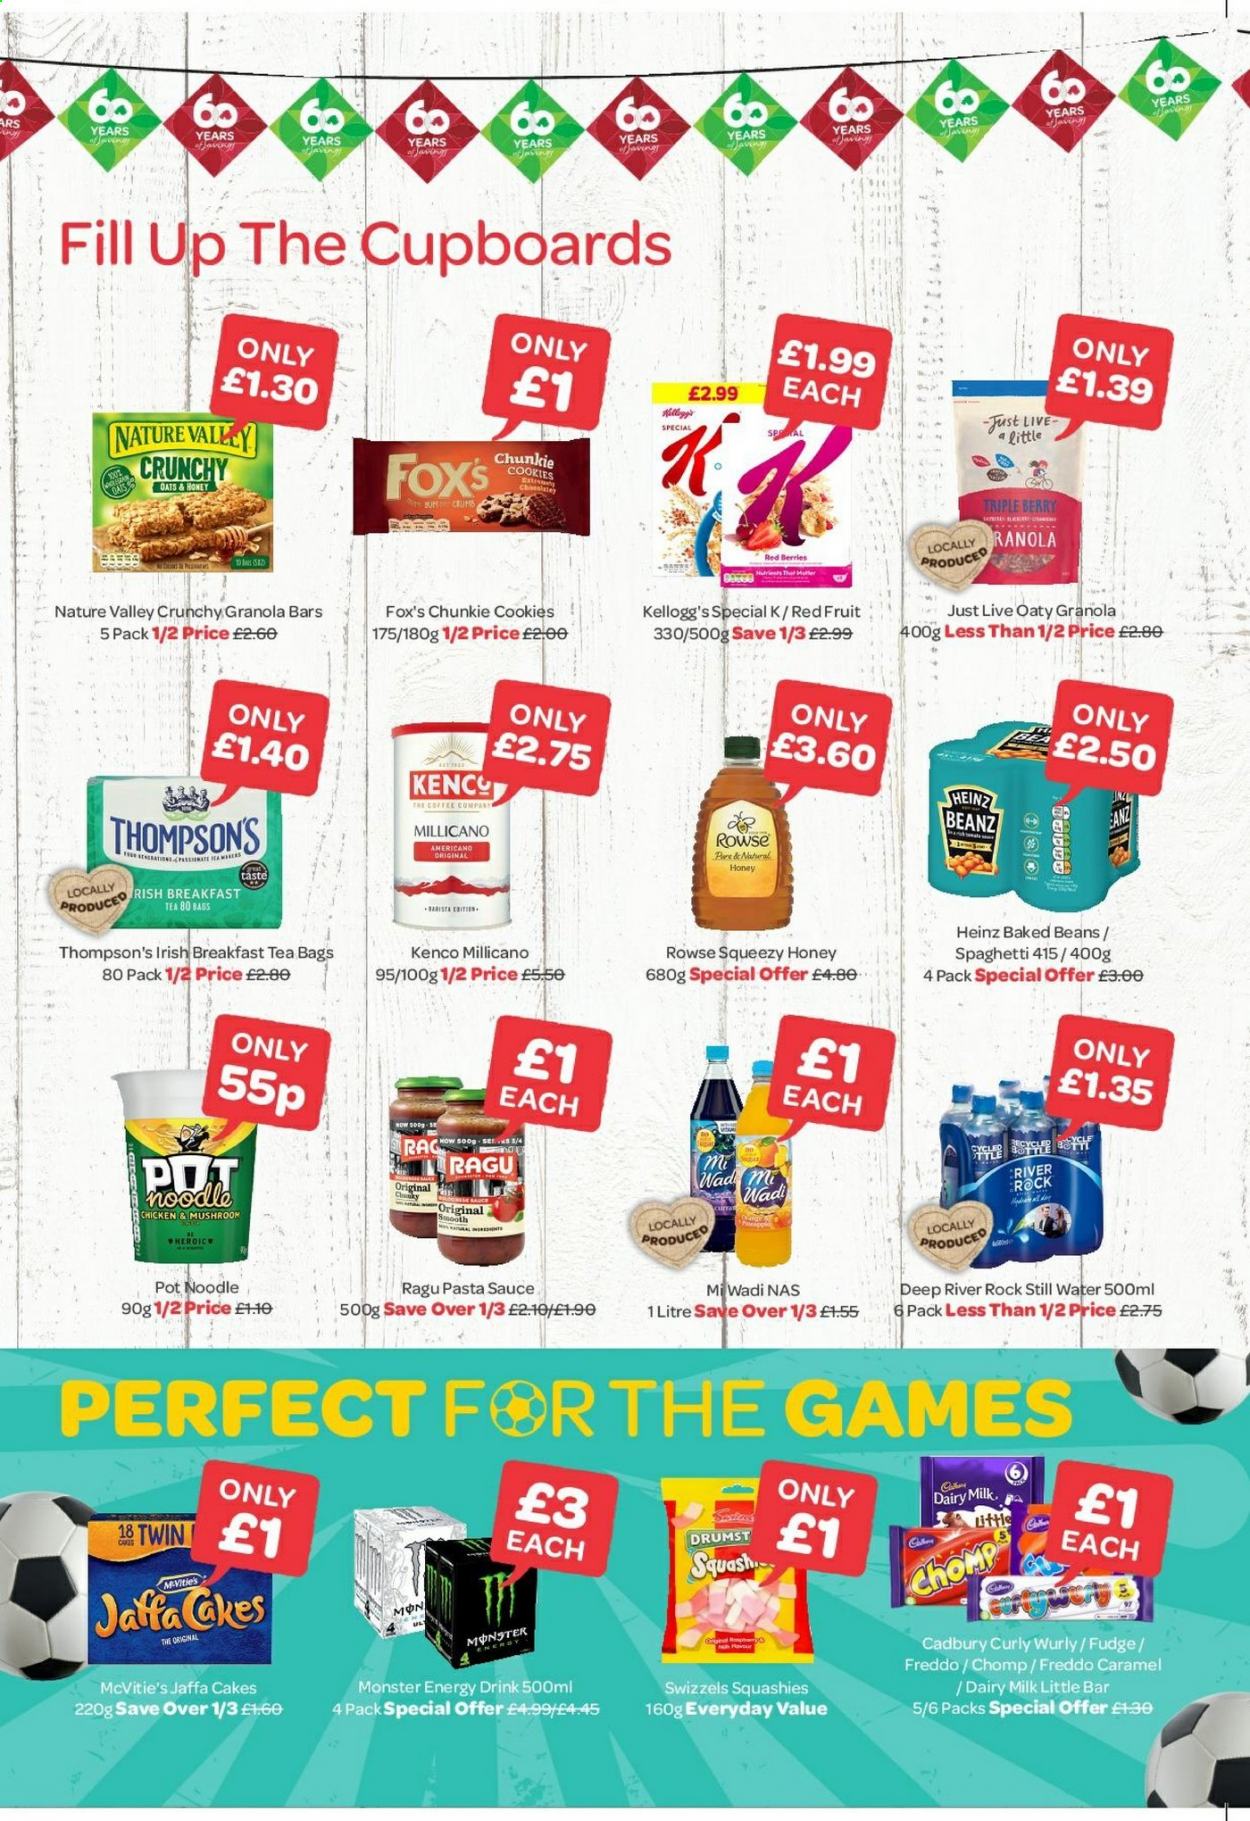 thumbnail - SPAR offer  - 07/06/2021 - 27/06/2021 - Sales products - cake, spaghetti, pasta sauce, noodles, ragú pasta, cookies, fudge, Cadbury, Kellogg's, Dairy Milk, Swizzels, Heinz, baked beans, granola bar, Nature Valley, caramel, ragu, energy drink, Monster Energy, Monster, mineral water, bottled water, tea bags, coffee, pot, Thompson's. Page 2.